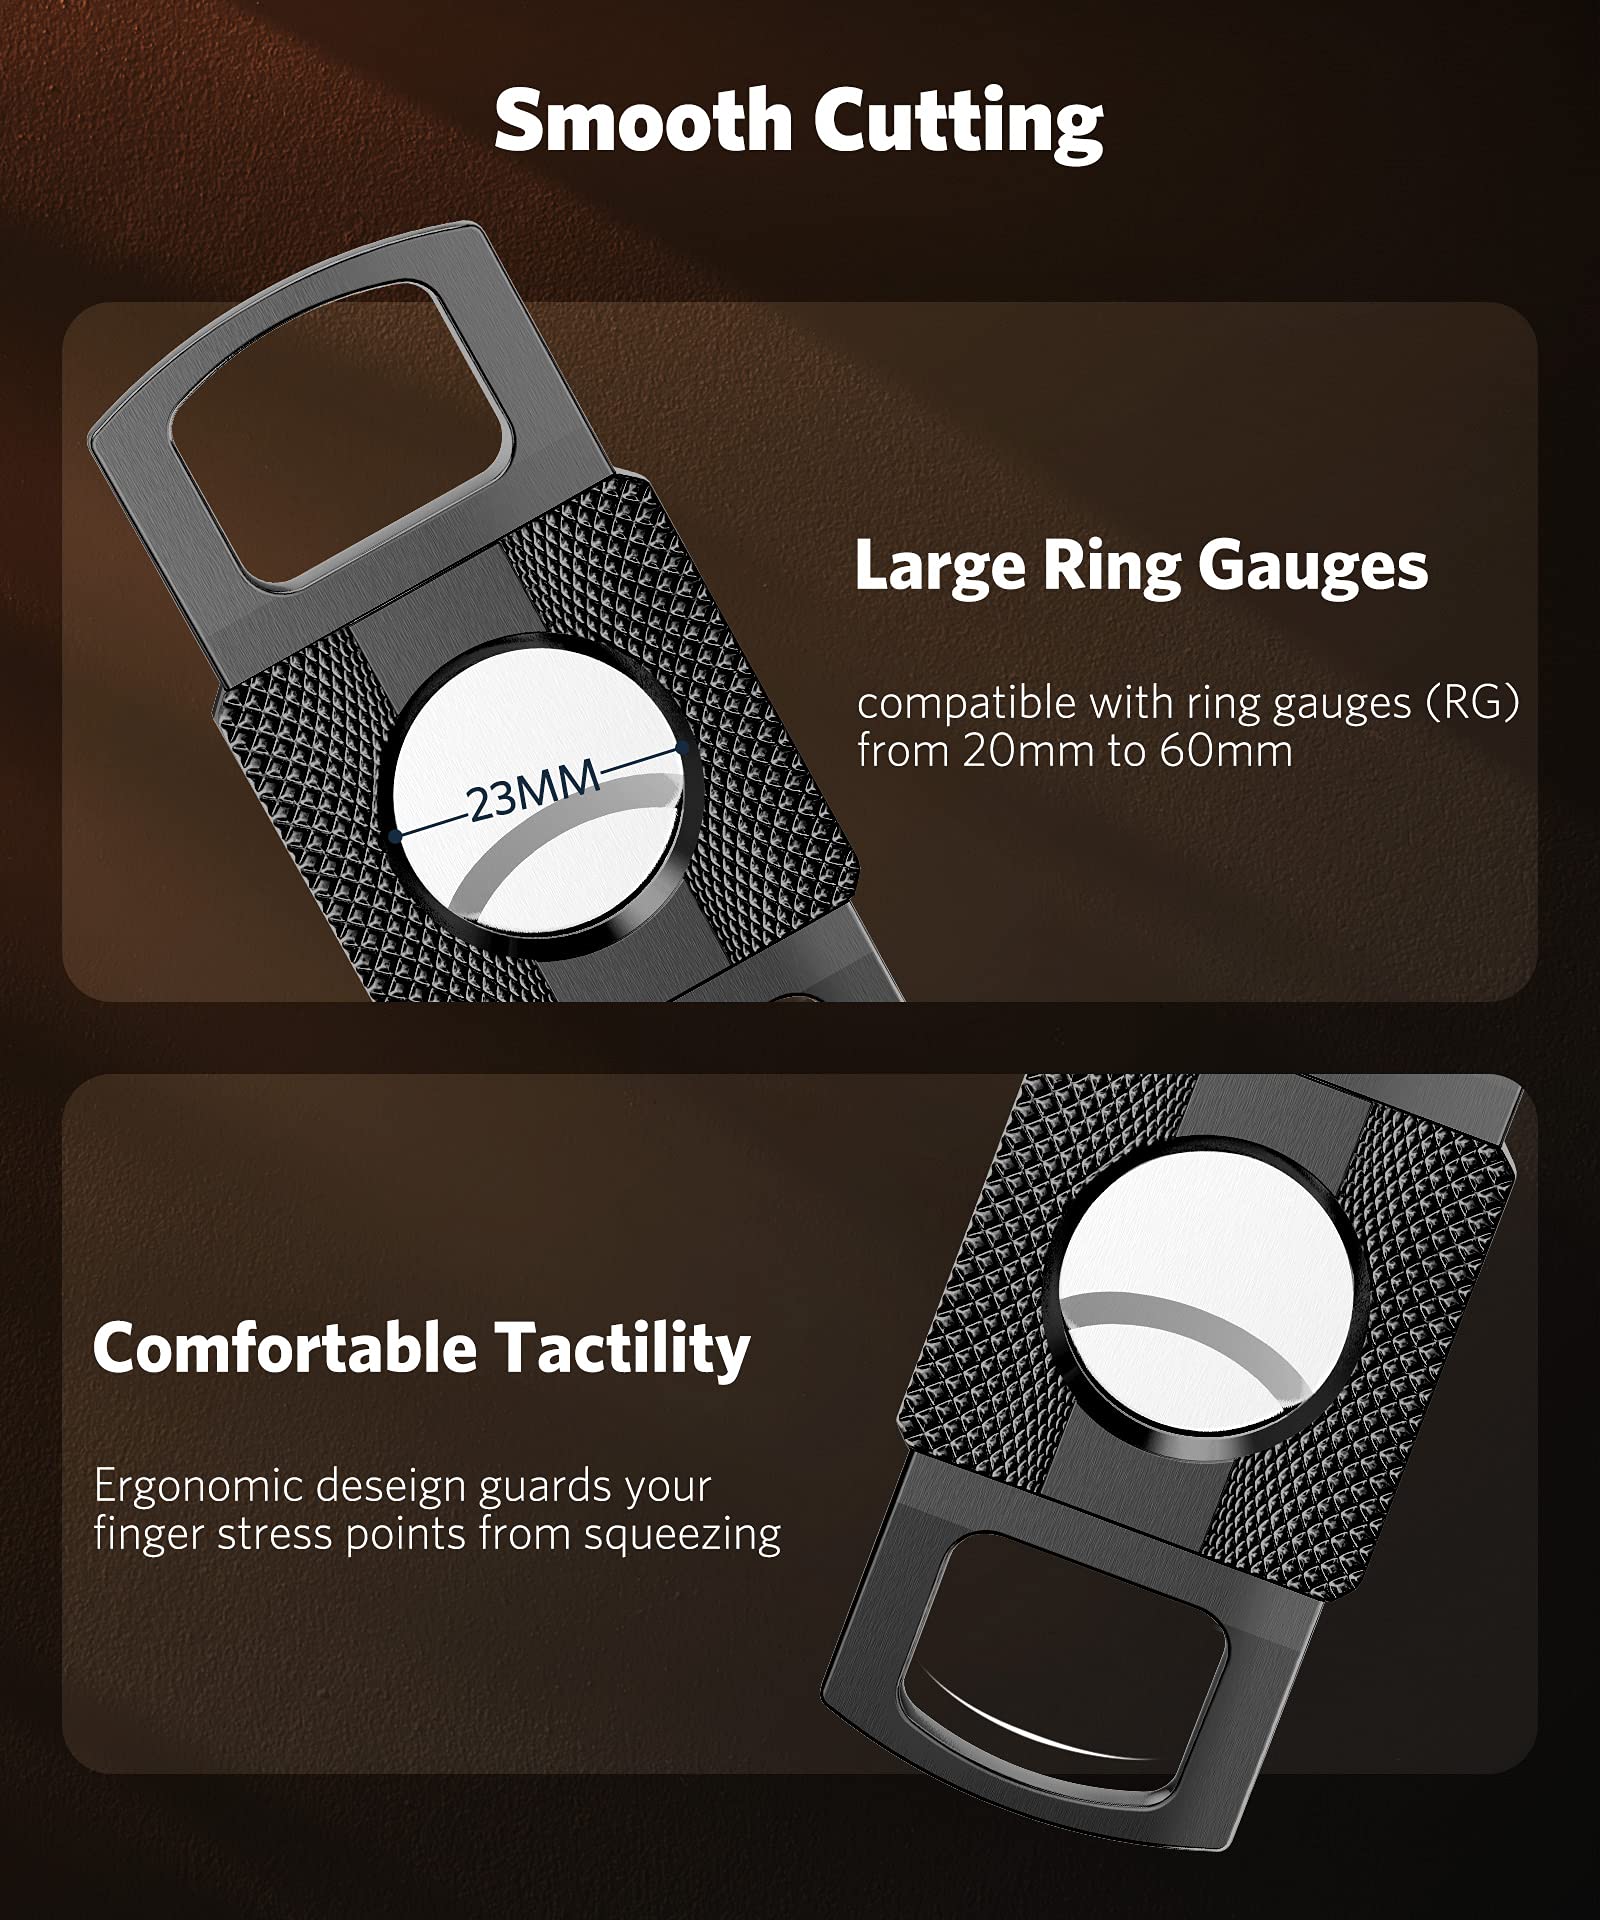 RONXS Torch Lighter and Cigar Cutter Set, Adjustable Triple Jet Flame Cigar Lighter, Windproof Butane Refillable Lighters, Gift for Dad Fathers Day(Butane Gas Not Included)